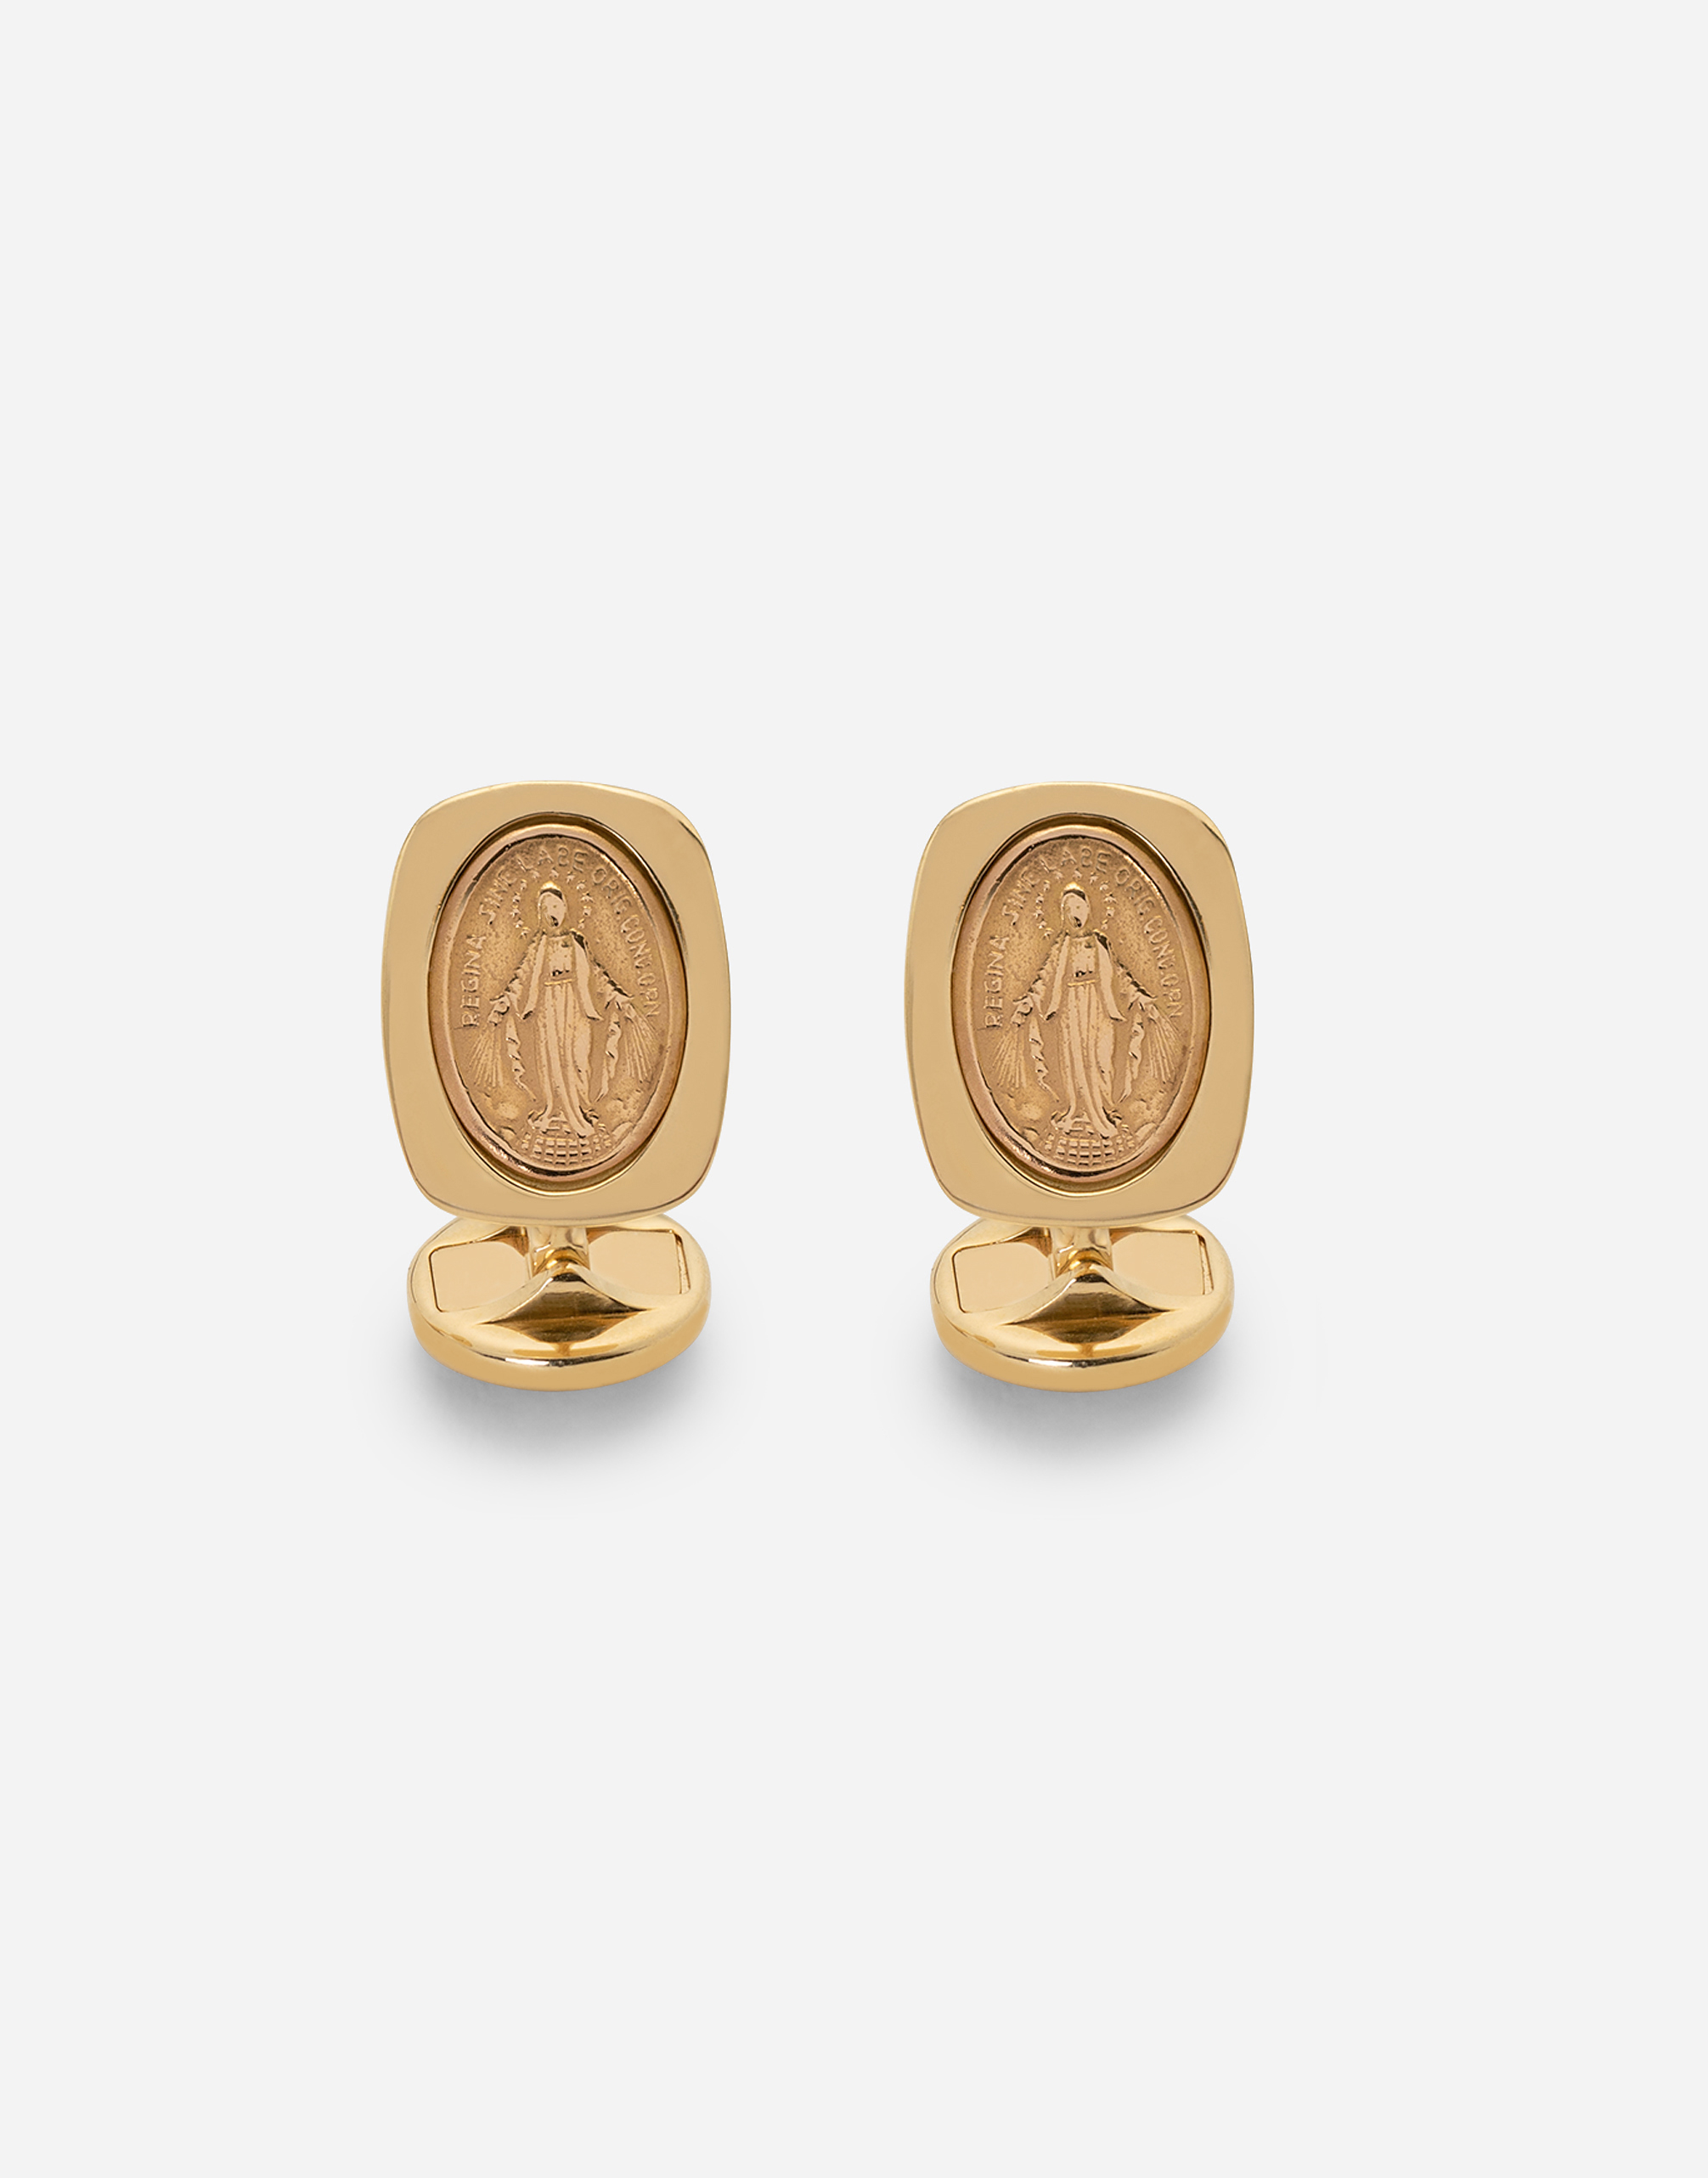 DEVOTION YELLOW GOLD CUFFLINKS WITH A RED GOLD VIRGIN MARY MEDALLION.